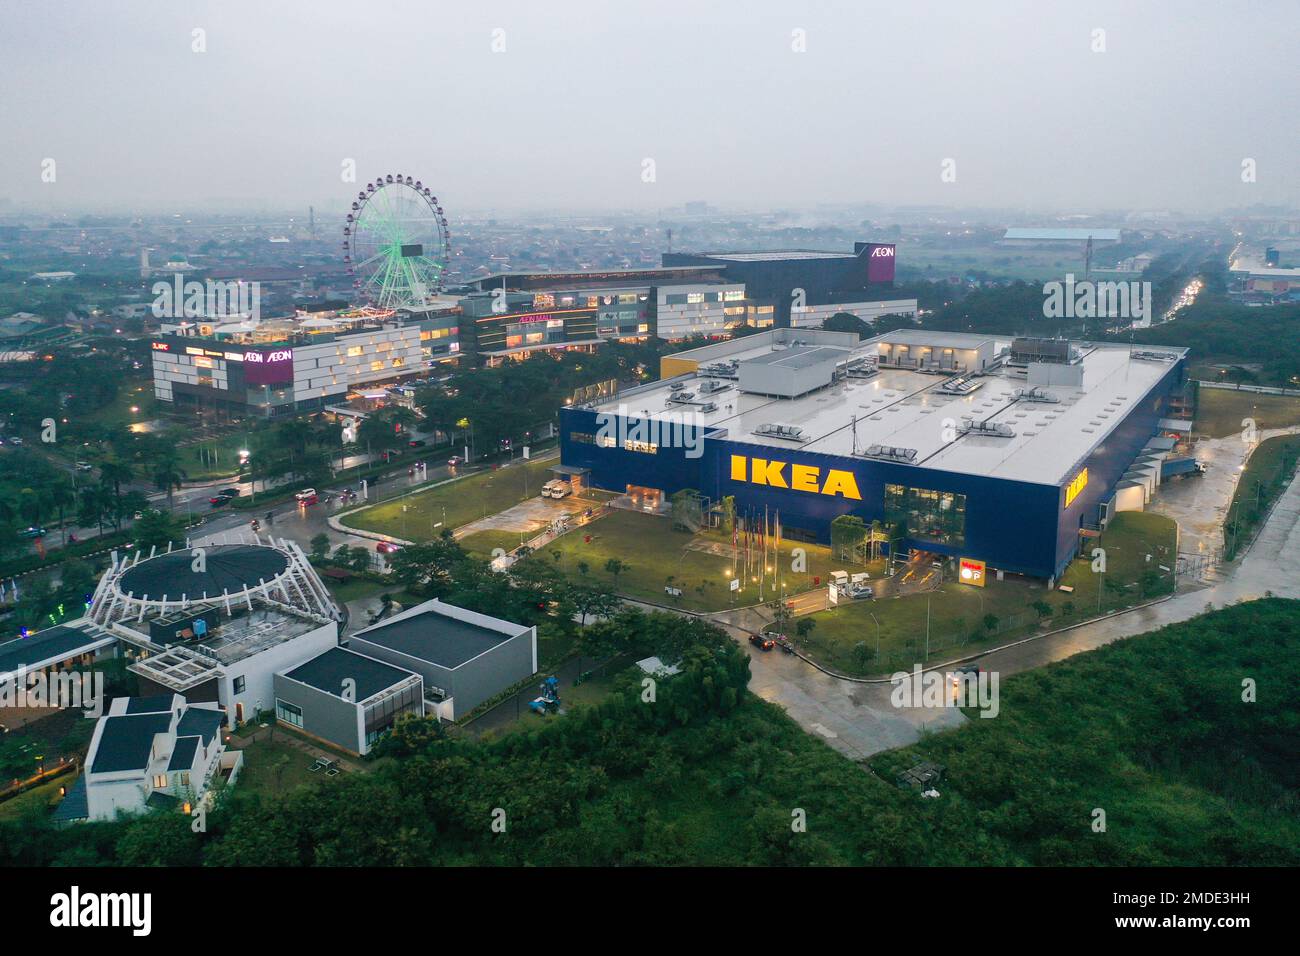 Aerial view of New IKEA Store Jakarta Garden City, AEON is a Largest retailer of ready-to-assemble or flat-pack furniture with noise cloud. Jakarta, J Stock Photo